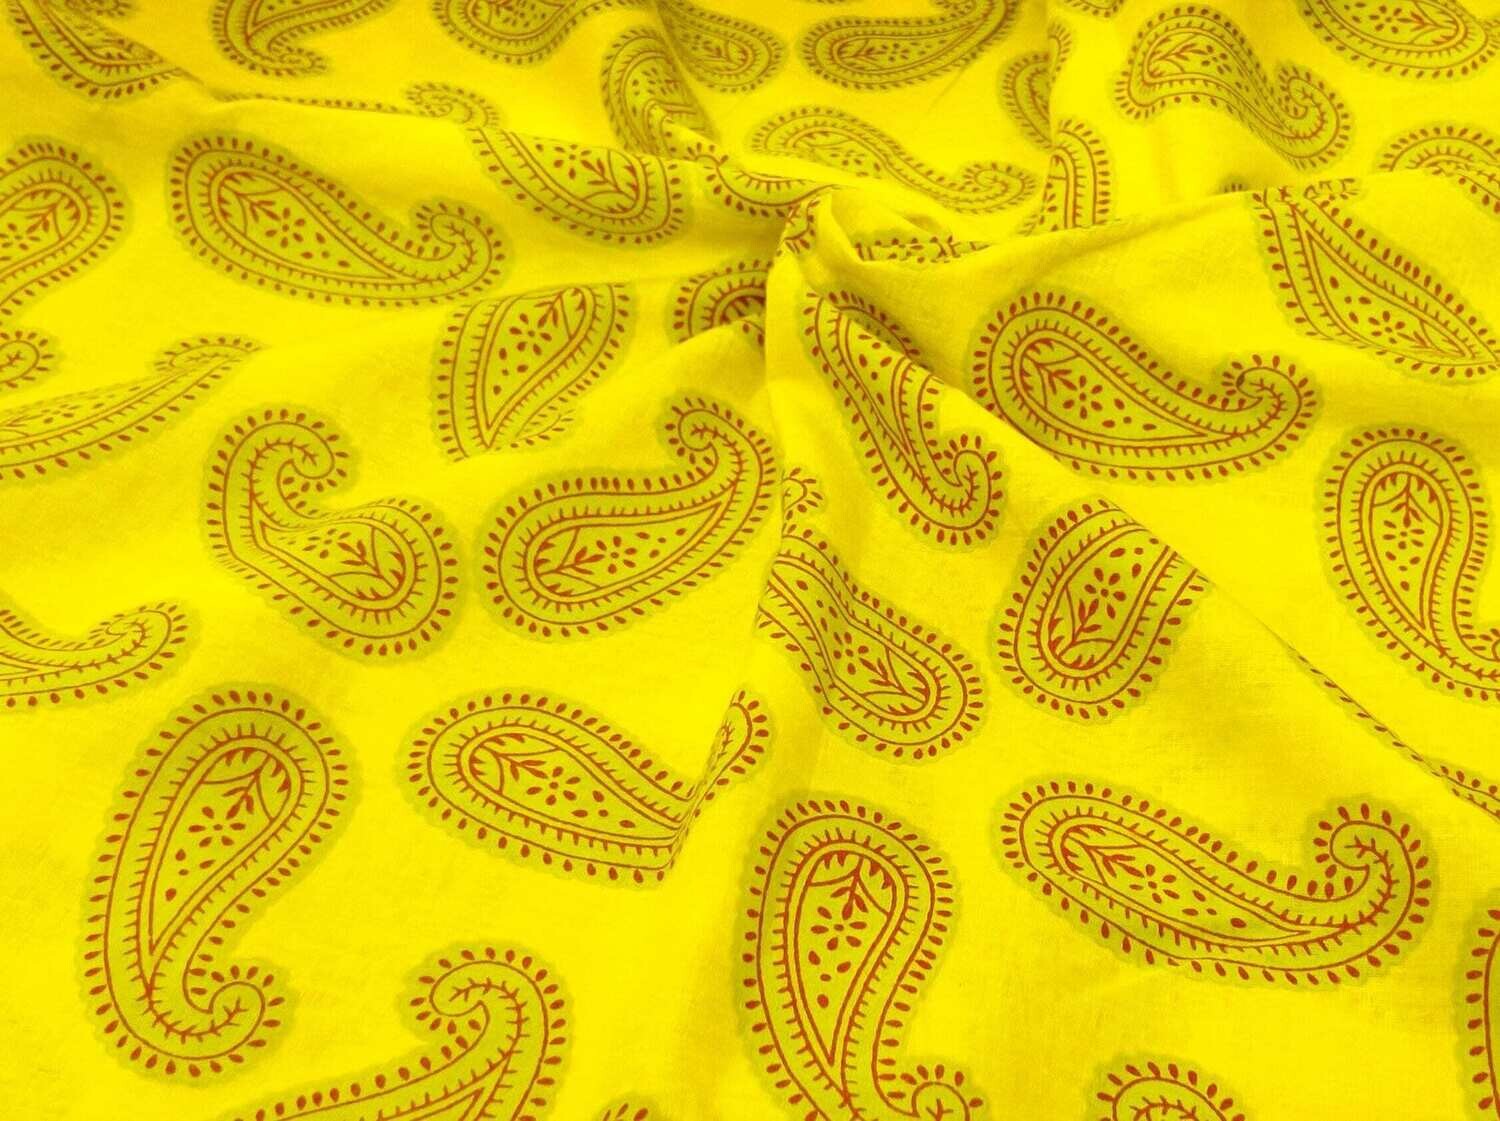 Yellow Paisley Cotton Fabric, Indian Block Print Fabrics, Sewing Crafting Quilting, 44 Inches Wide